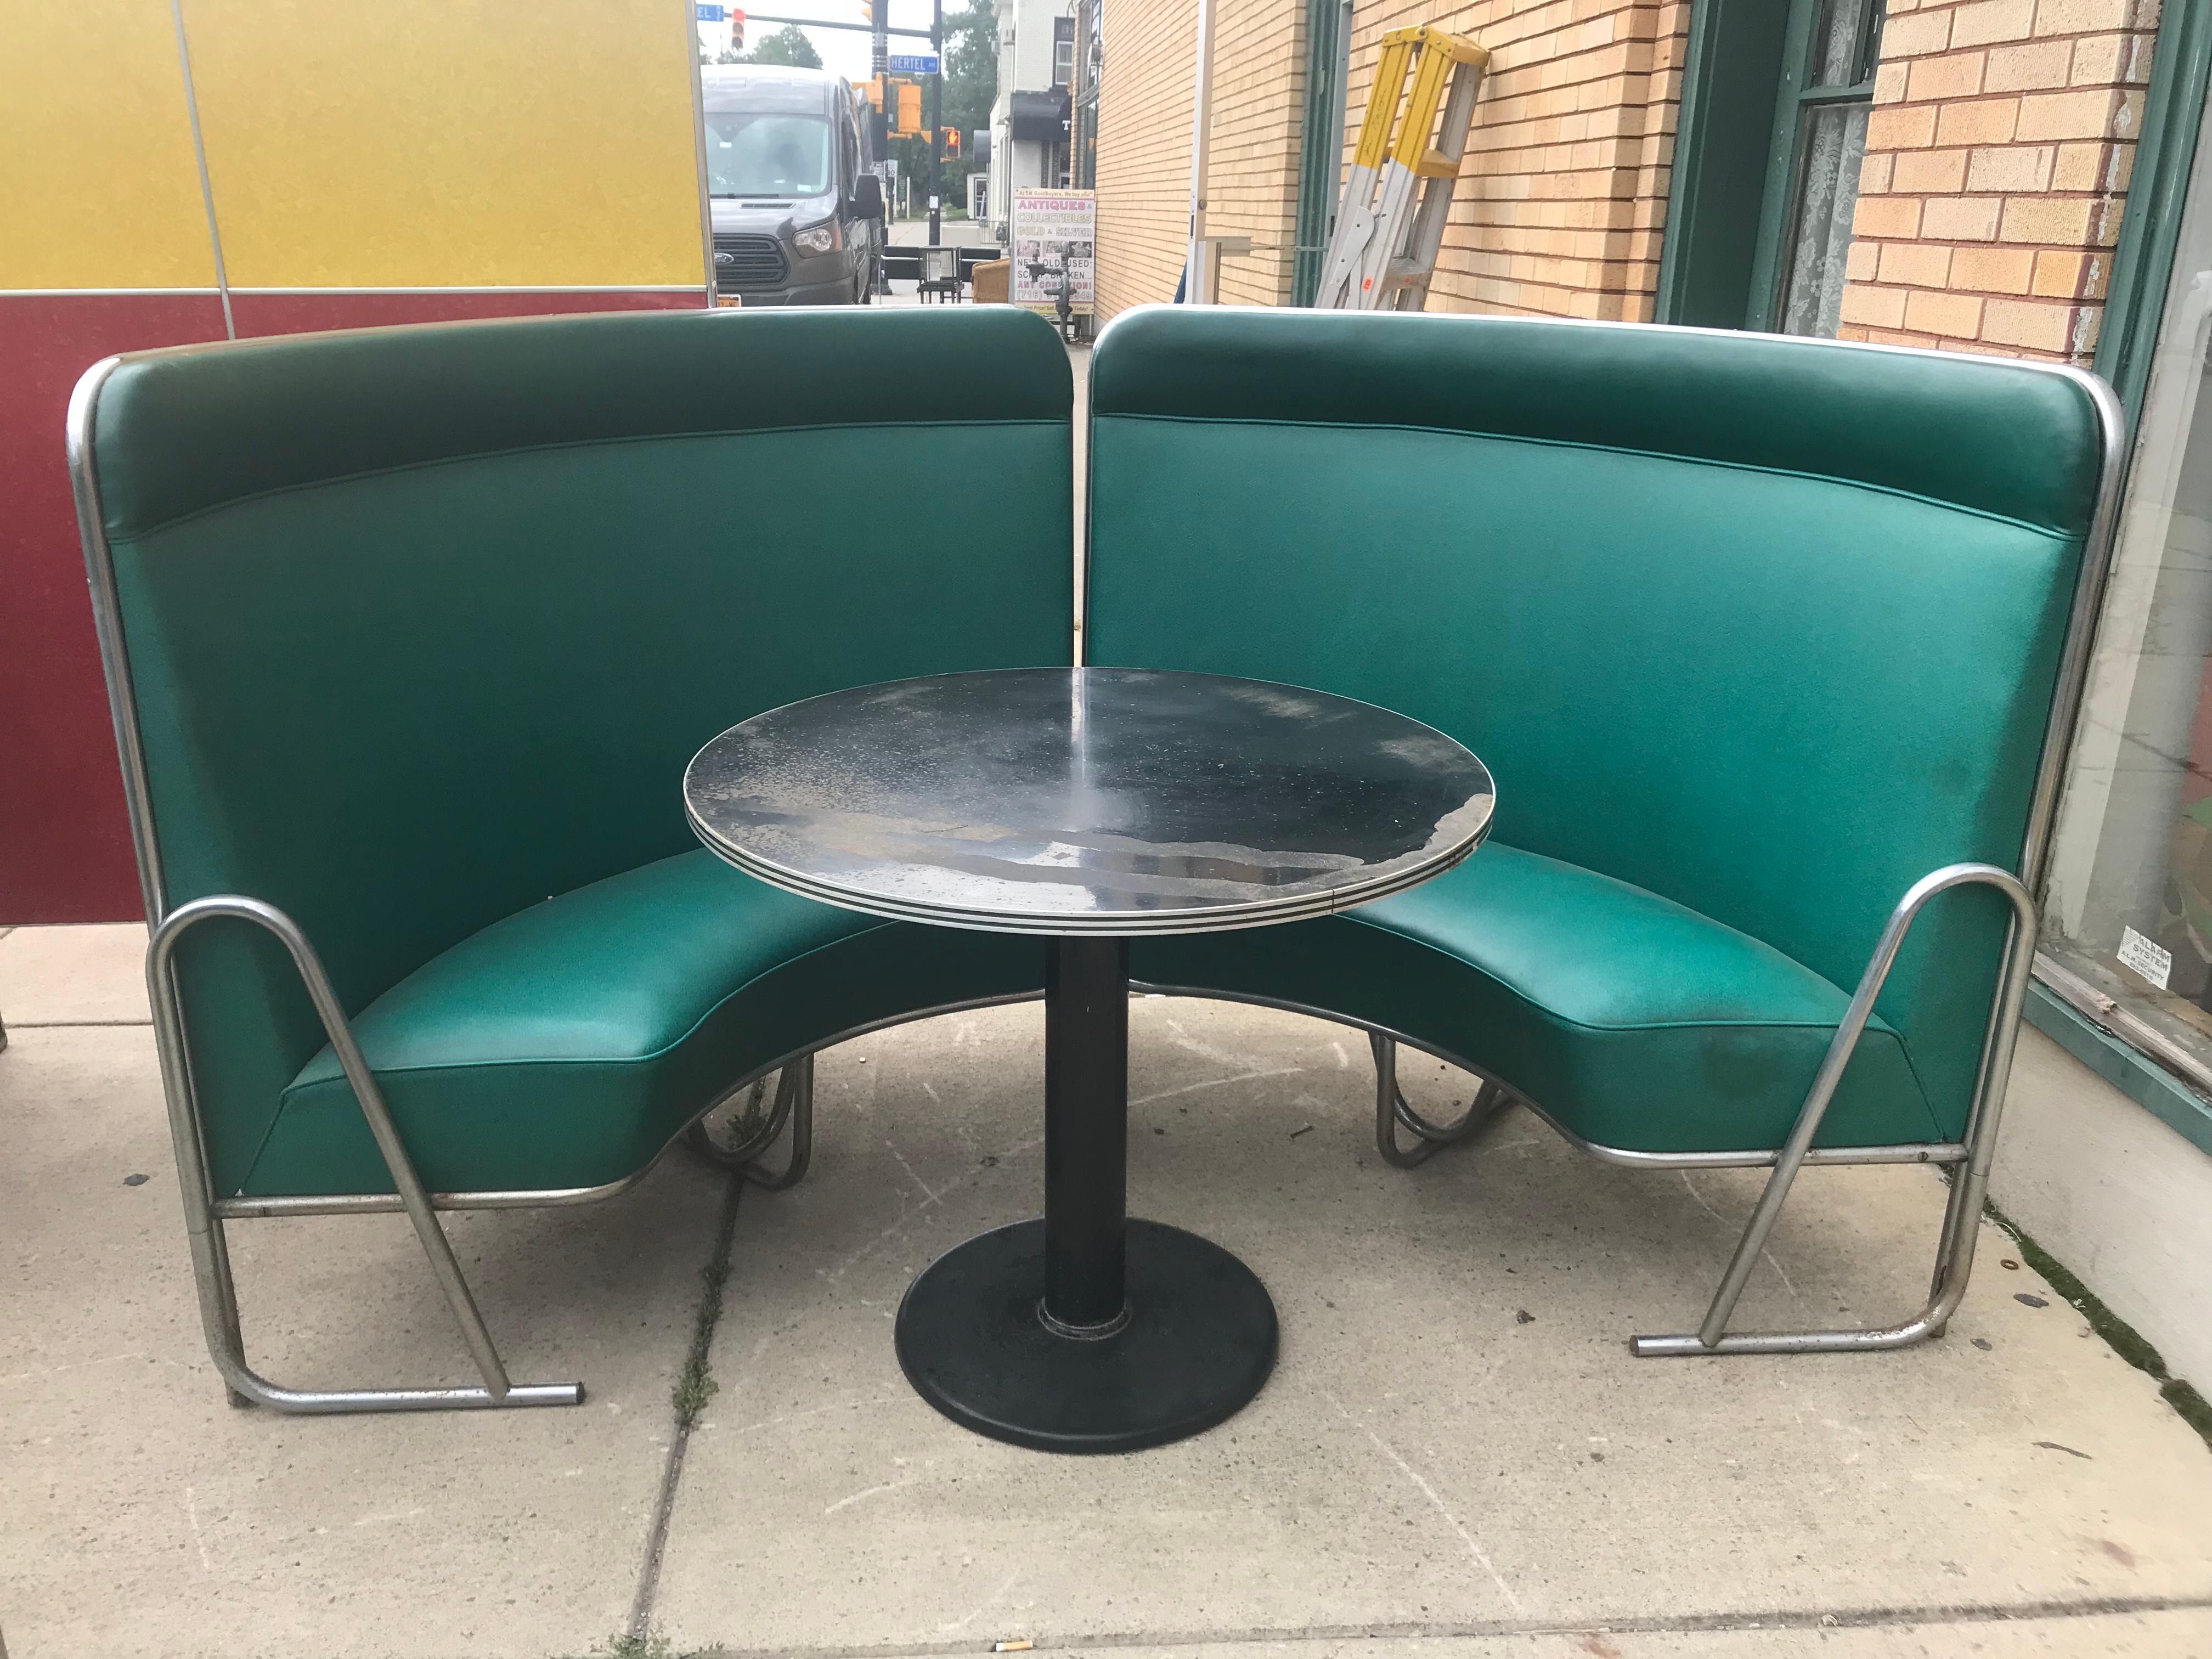 Original Art Deco diner, seats 40 designed by Wolfgang Hoffmann for Howell circa 1930s. Complete contents of diner dismantled in upstate New York,, seating for 40 people includes booths, tables counters and stools. Amazing Art Deco design tubular